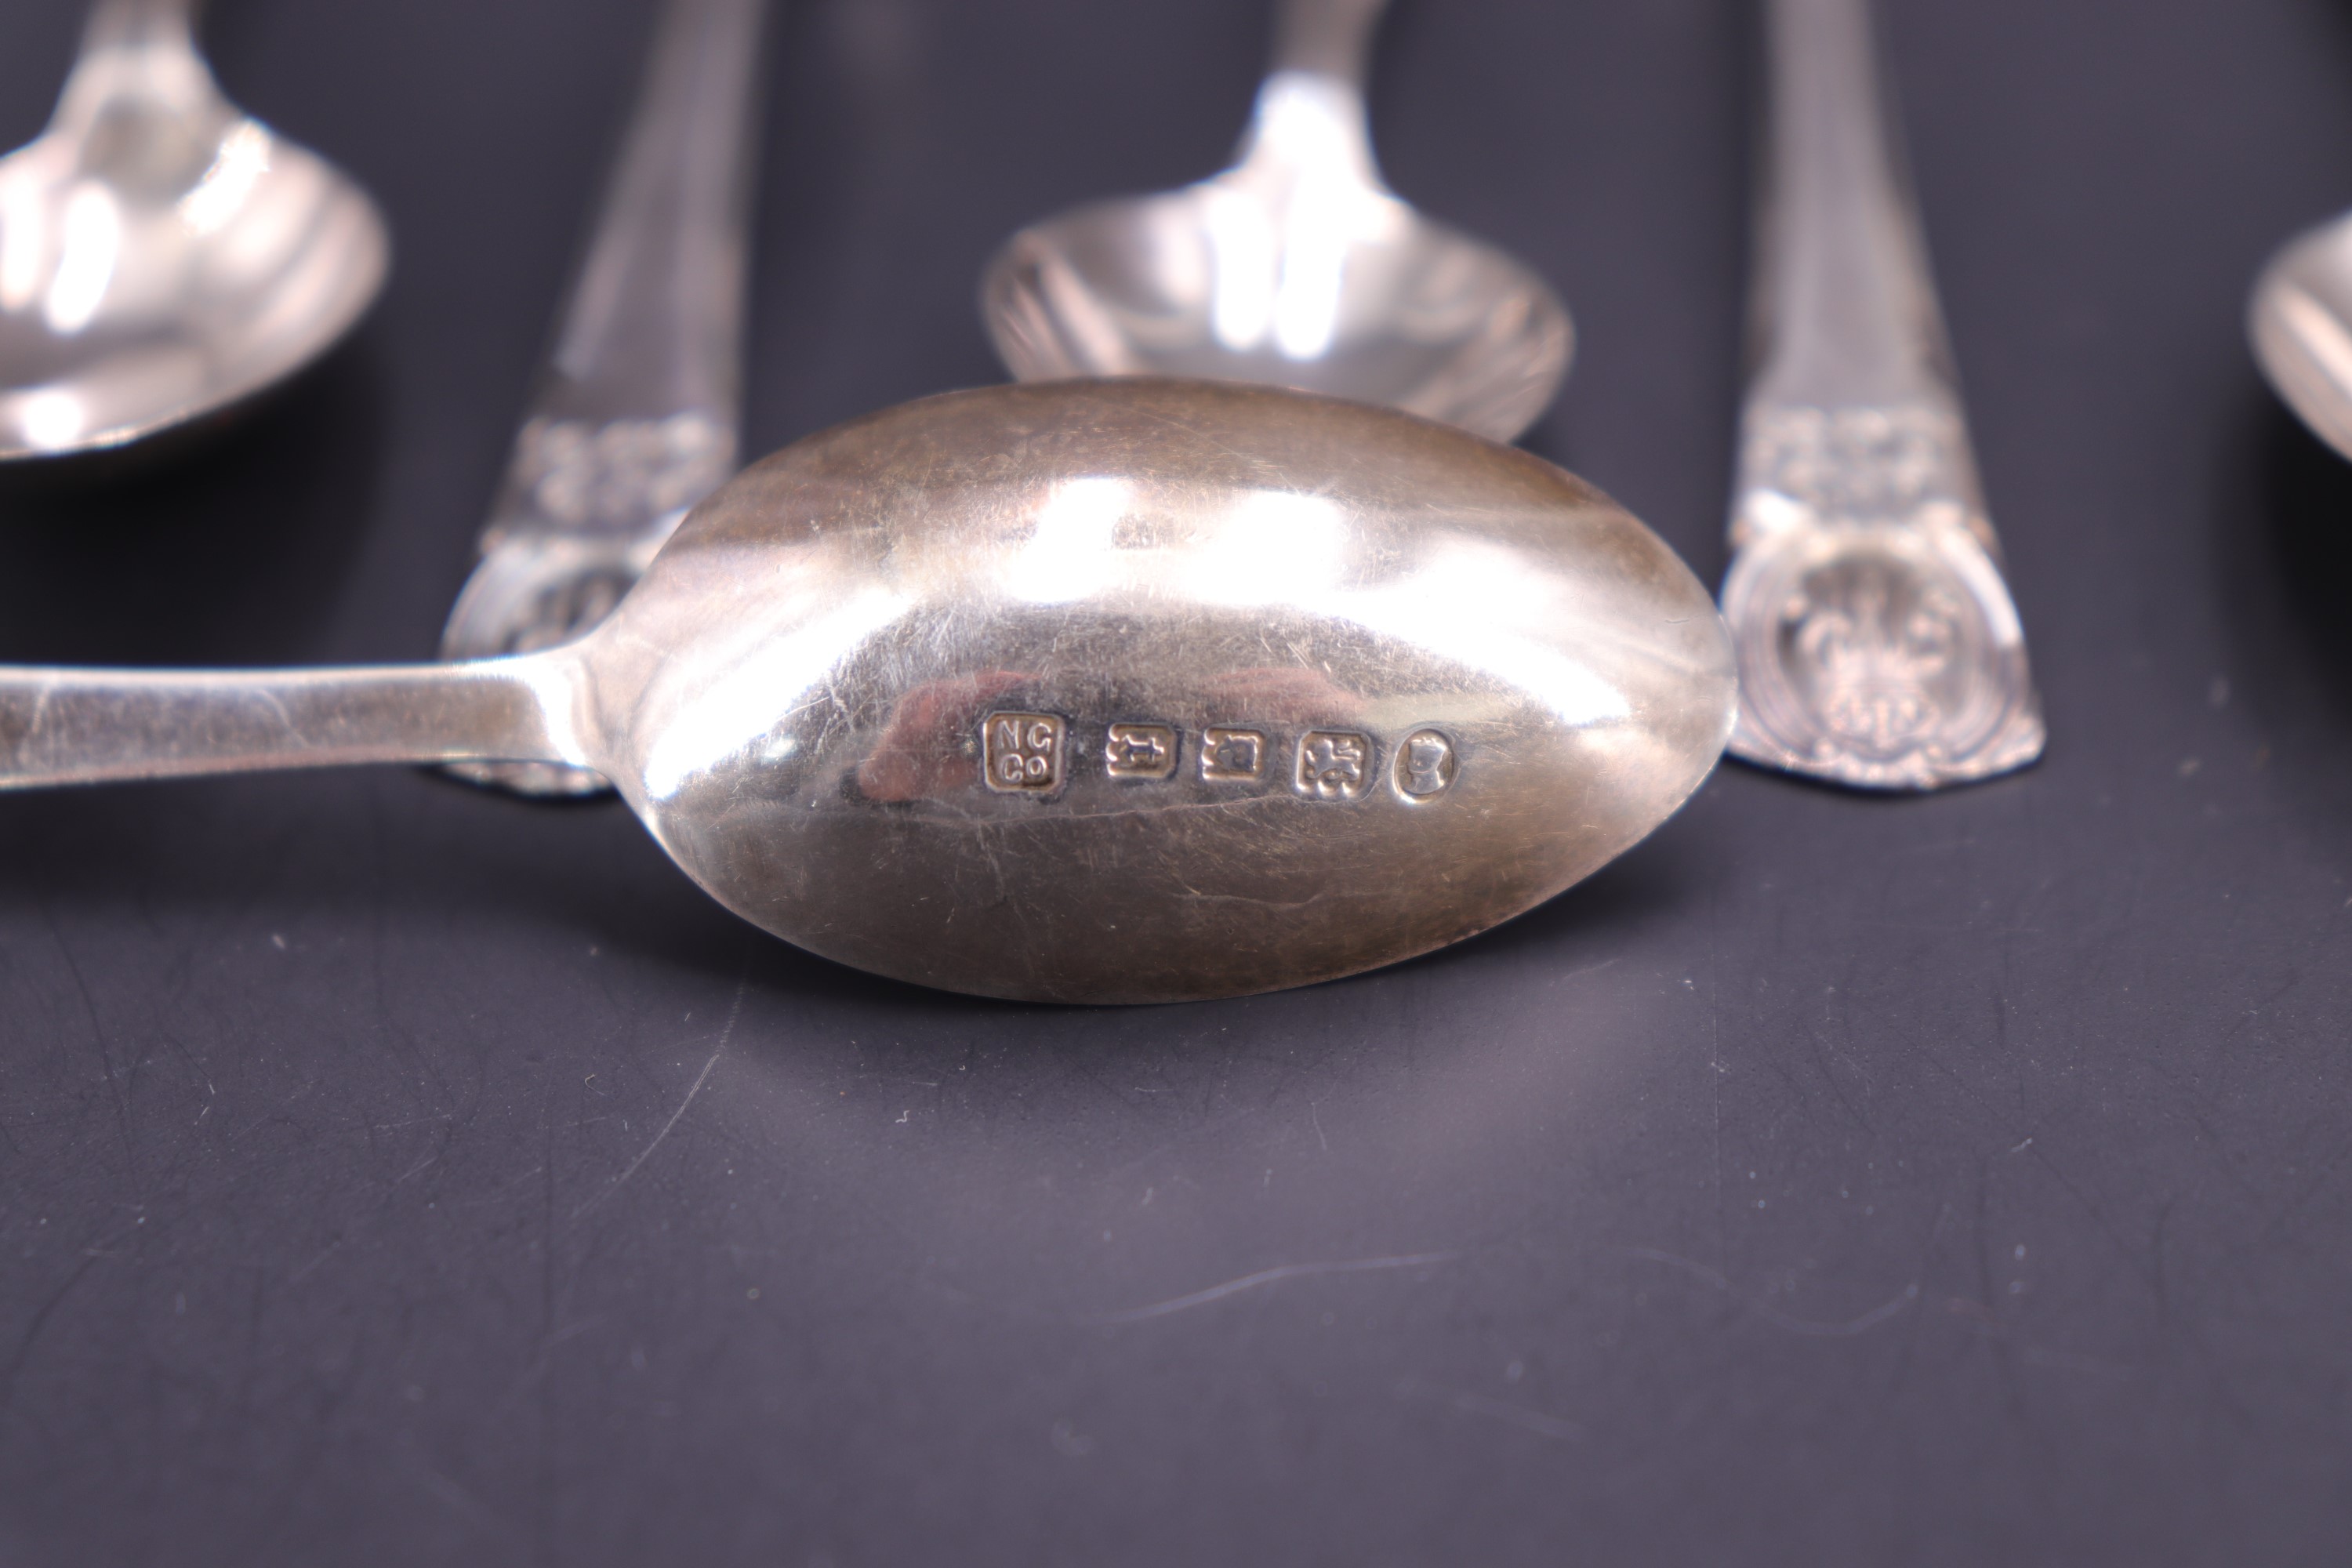 Six George V silver jubilee commemorative silver coffee spoons, R Bond & Co, Sheffield, 1925 - Image 2 of 4